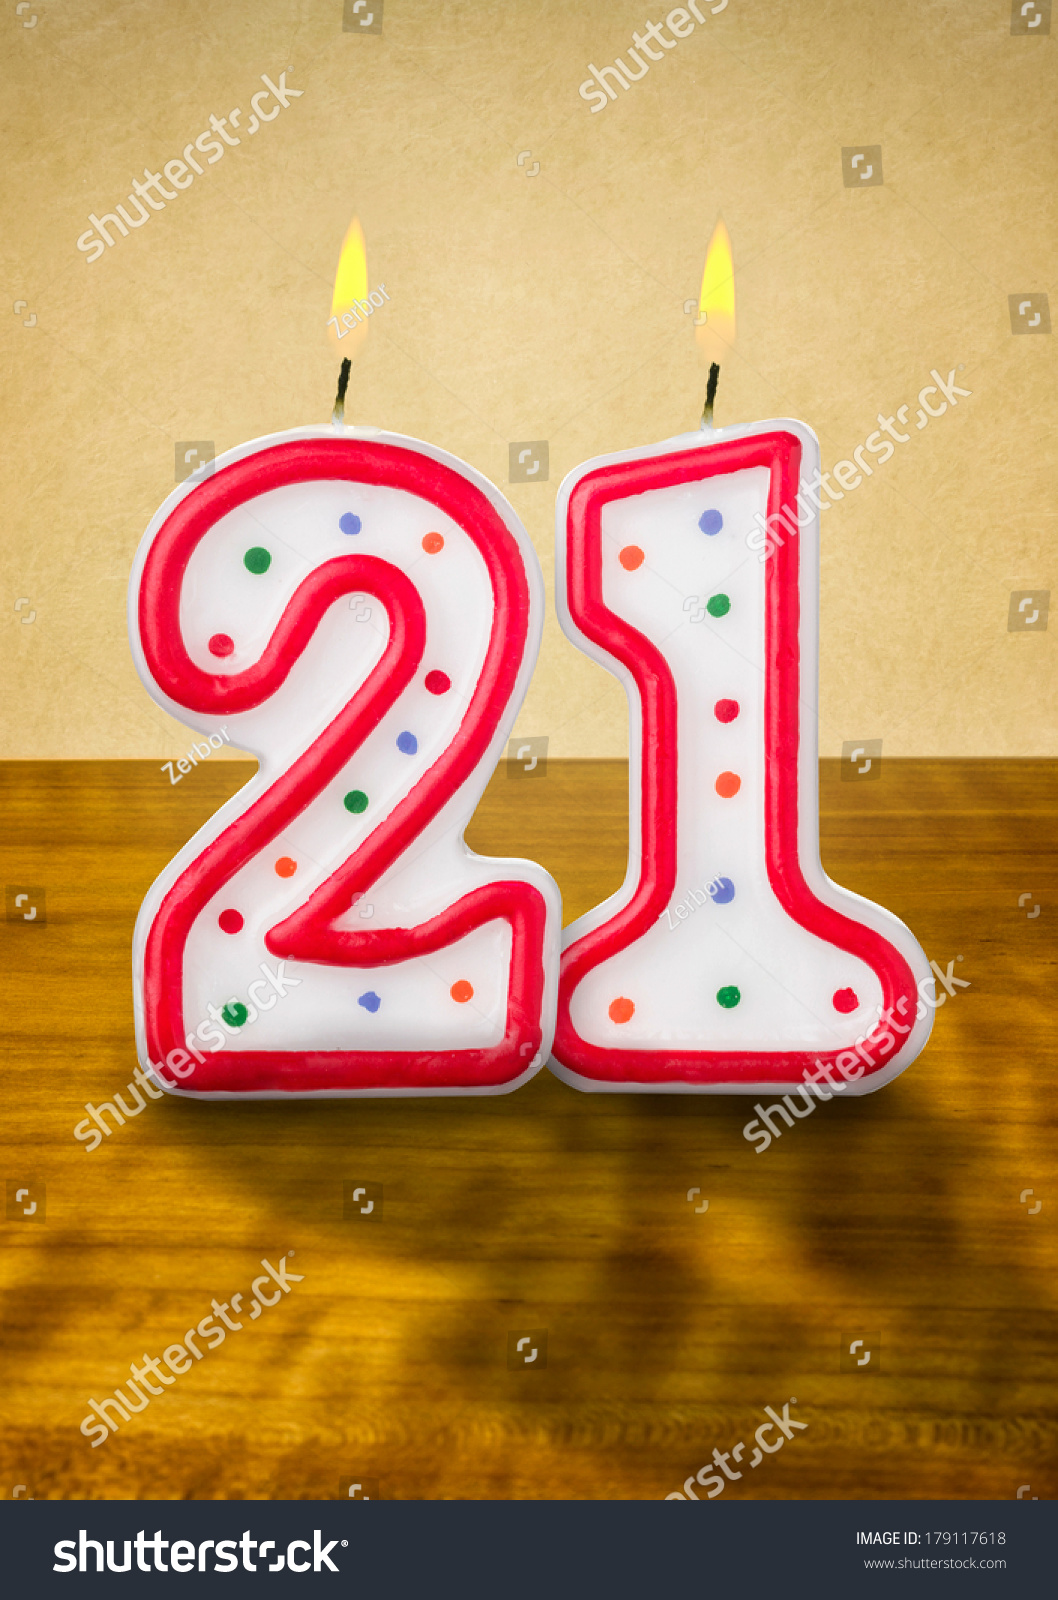 541 21 birthday candles Images, Stock Photos & Vectors | Shutterstock